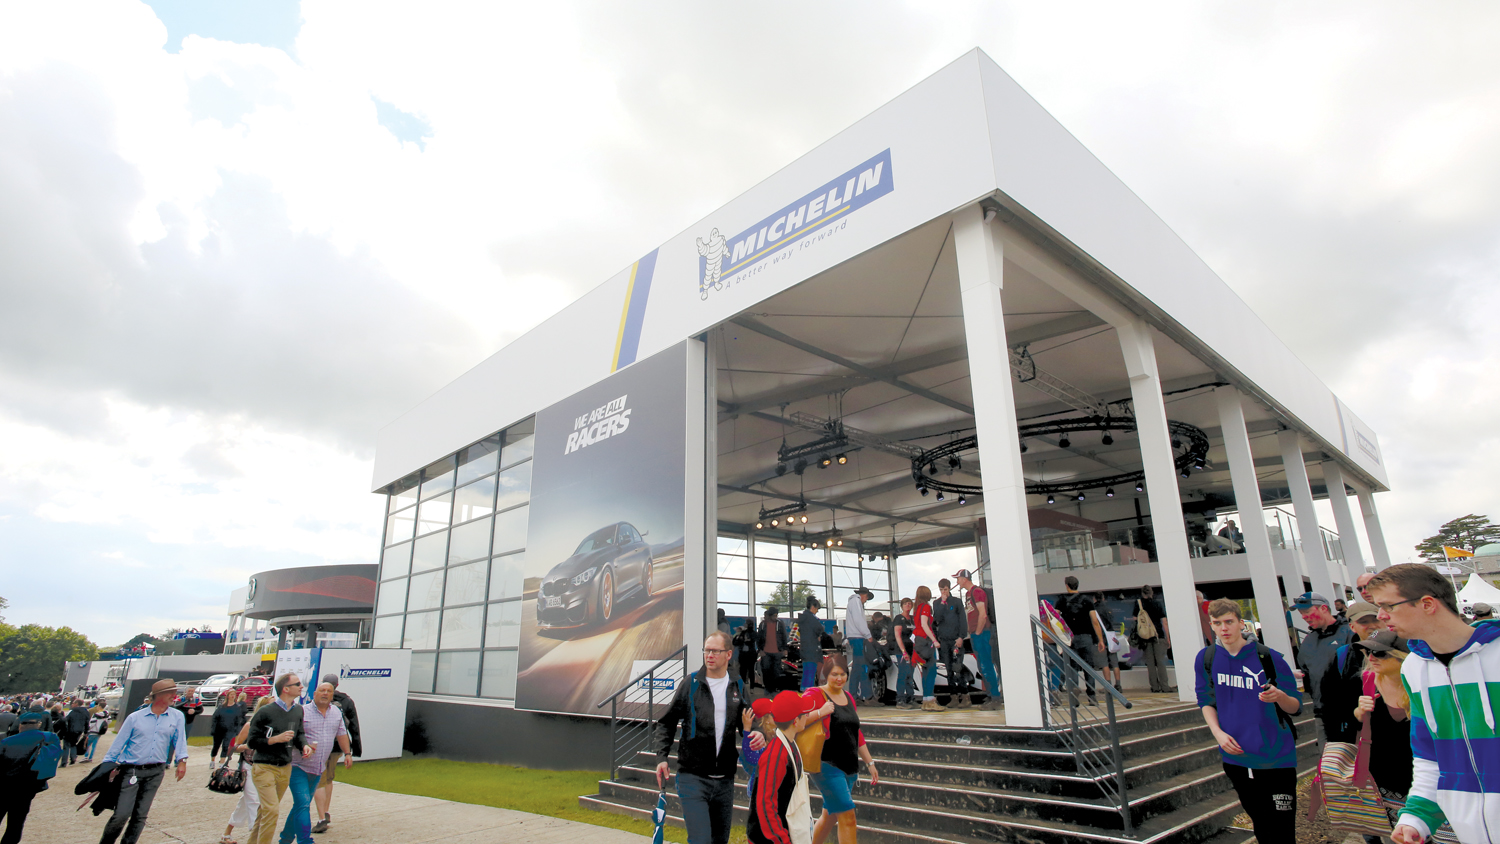 TenTen Crew tents the Goodwood Festival of Speed – Fabric Architecture Magazine